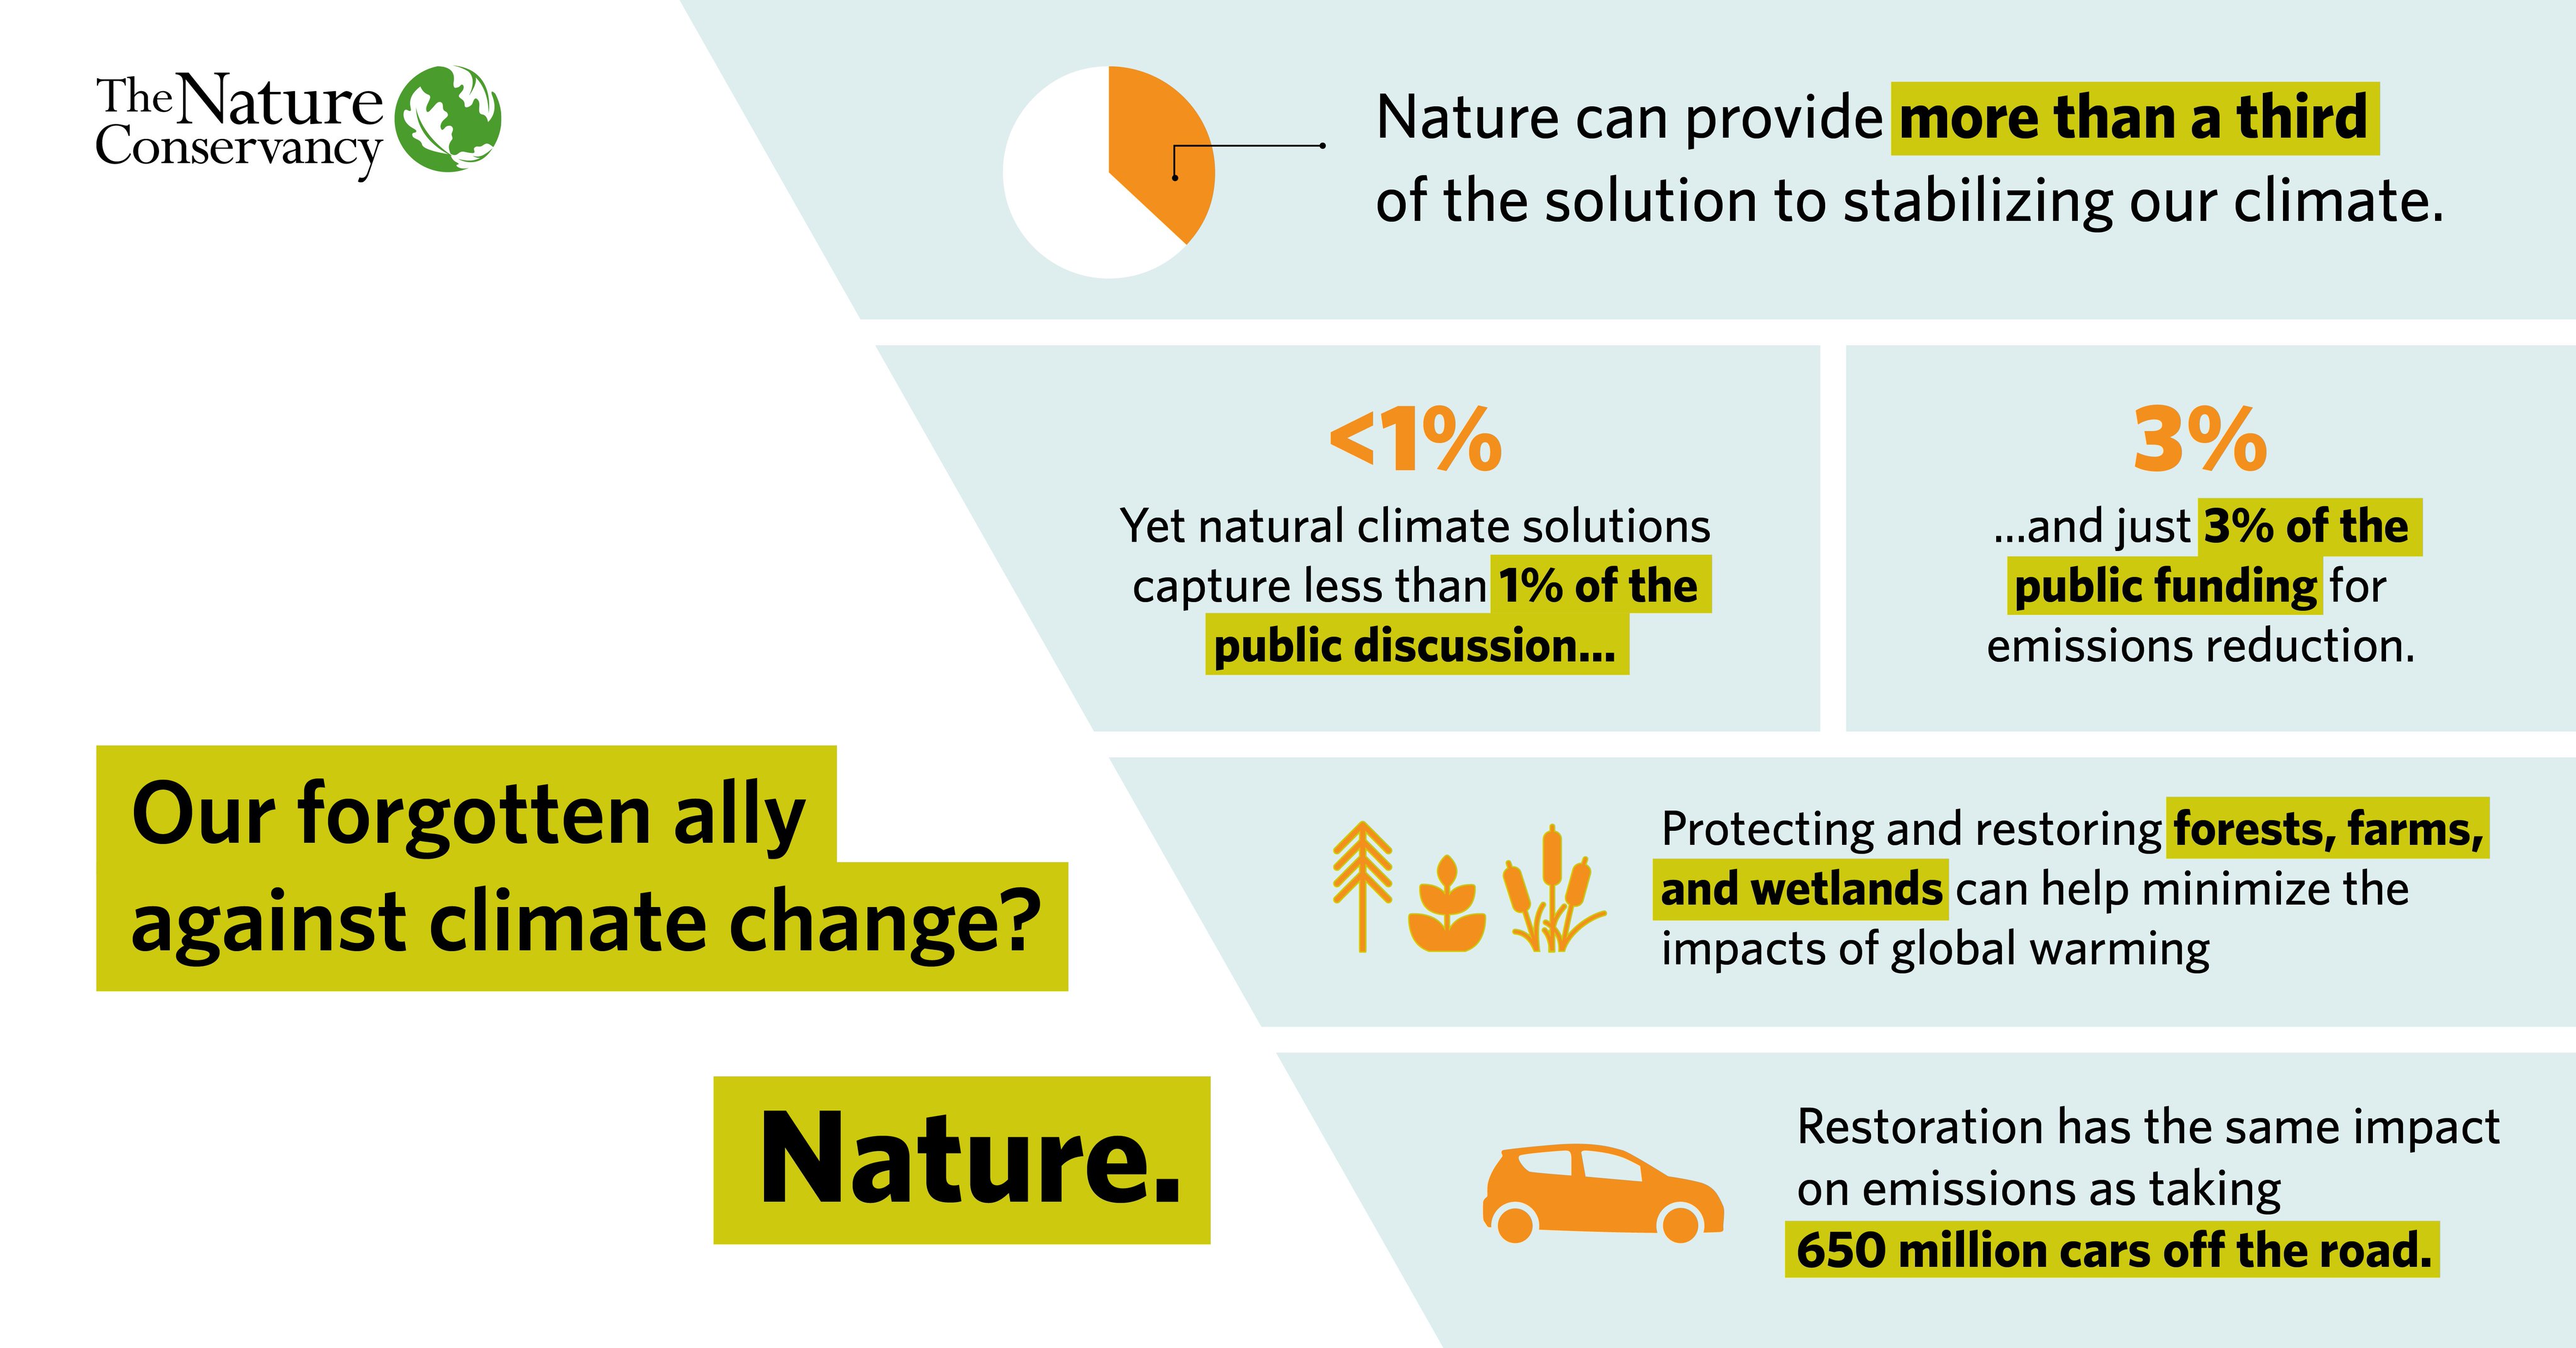 The Nature Conservancy on Twitter: "If we serious about climate change, we must get serious about investing in more about #NaturalClimateSolutions » https://t.co/Uu4hfh3sU9 https://t.co/QCA5jhrzxo" /